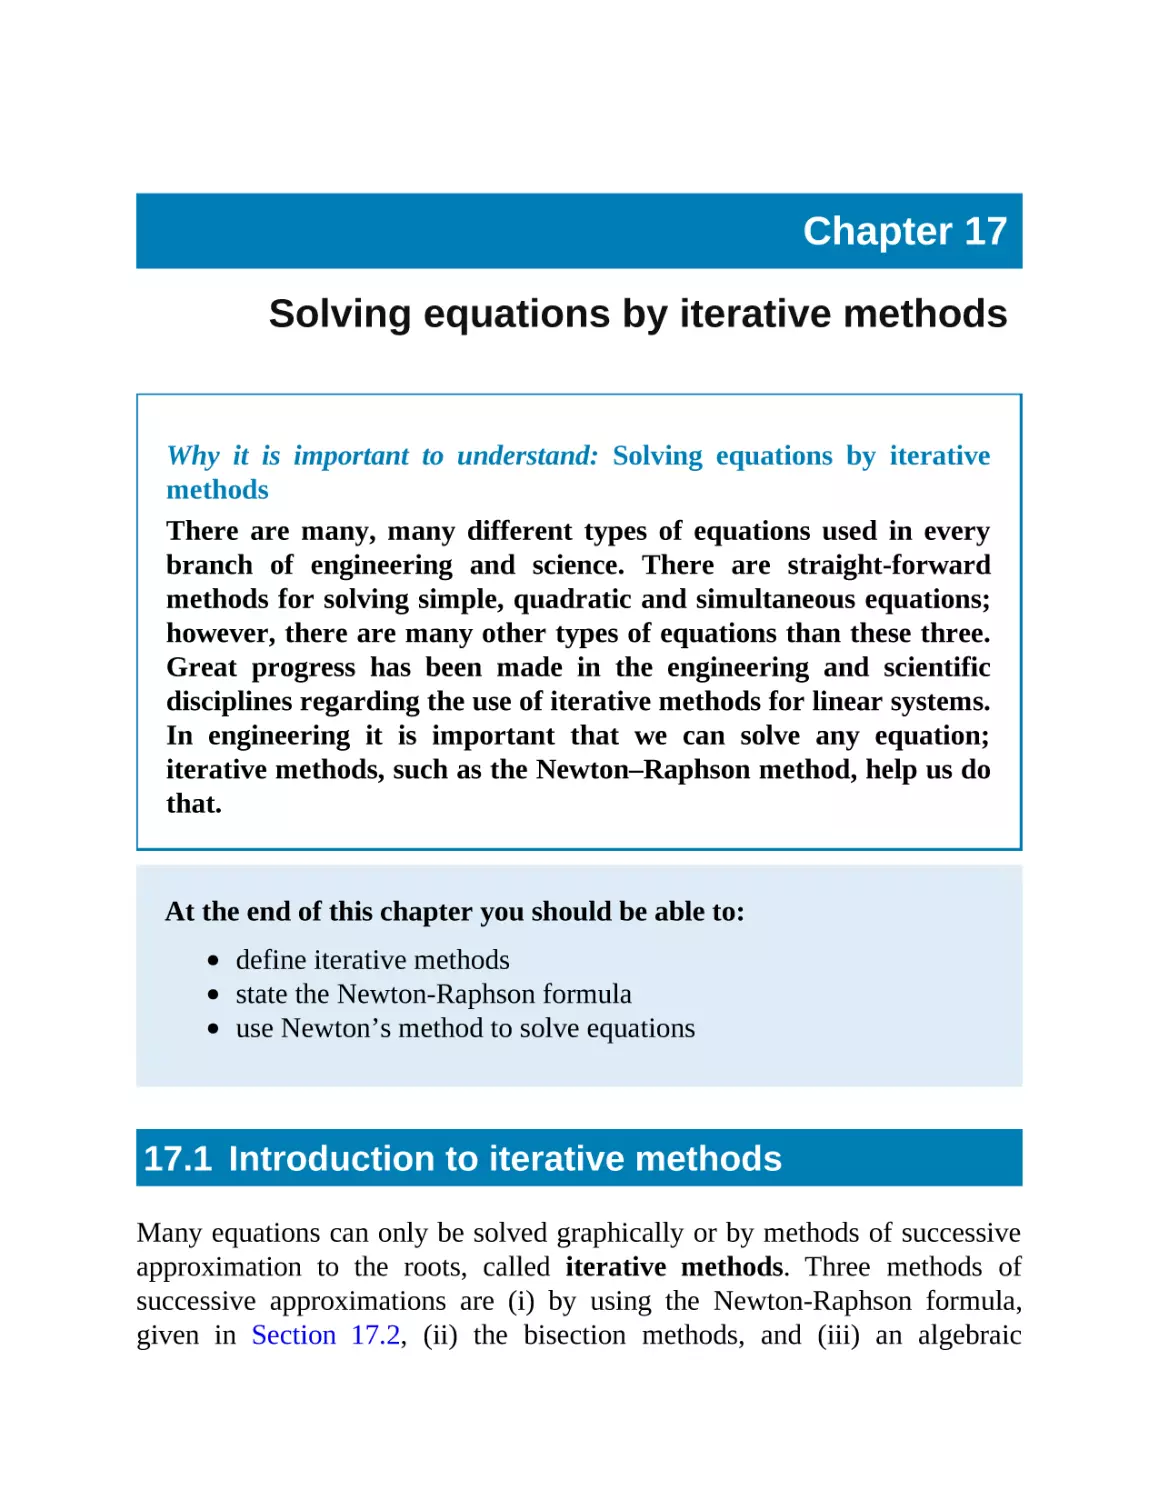 17 Solving equations by iterative methods
17.1 Introduction to iterative methods